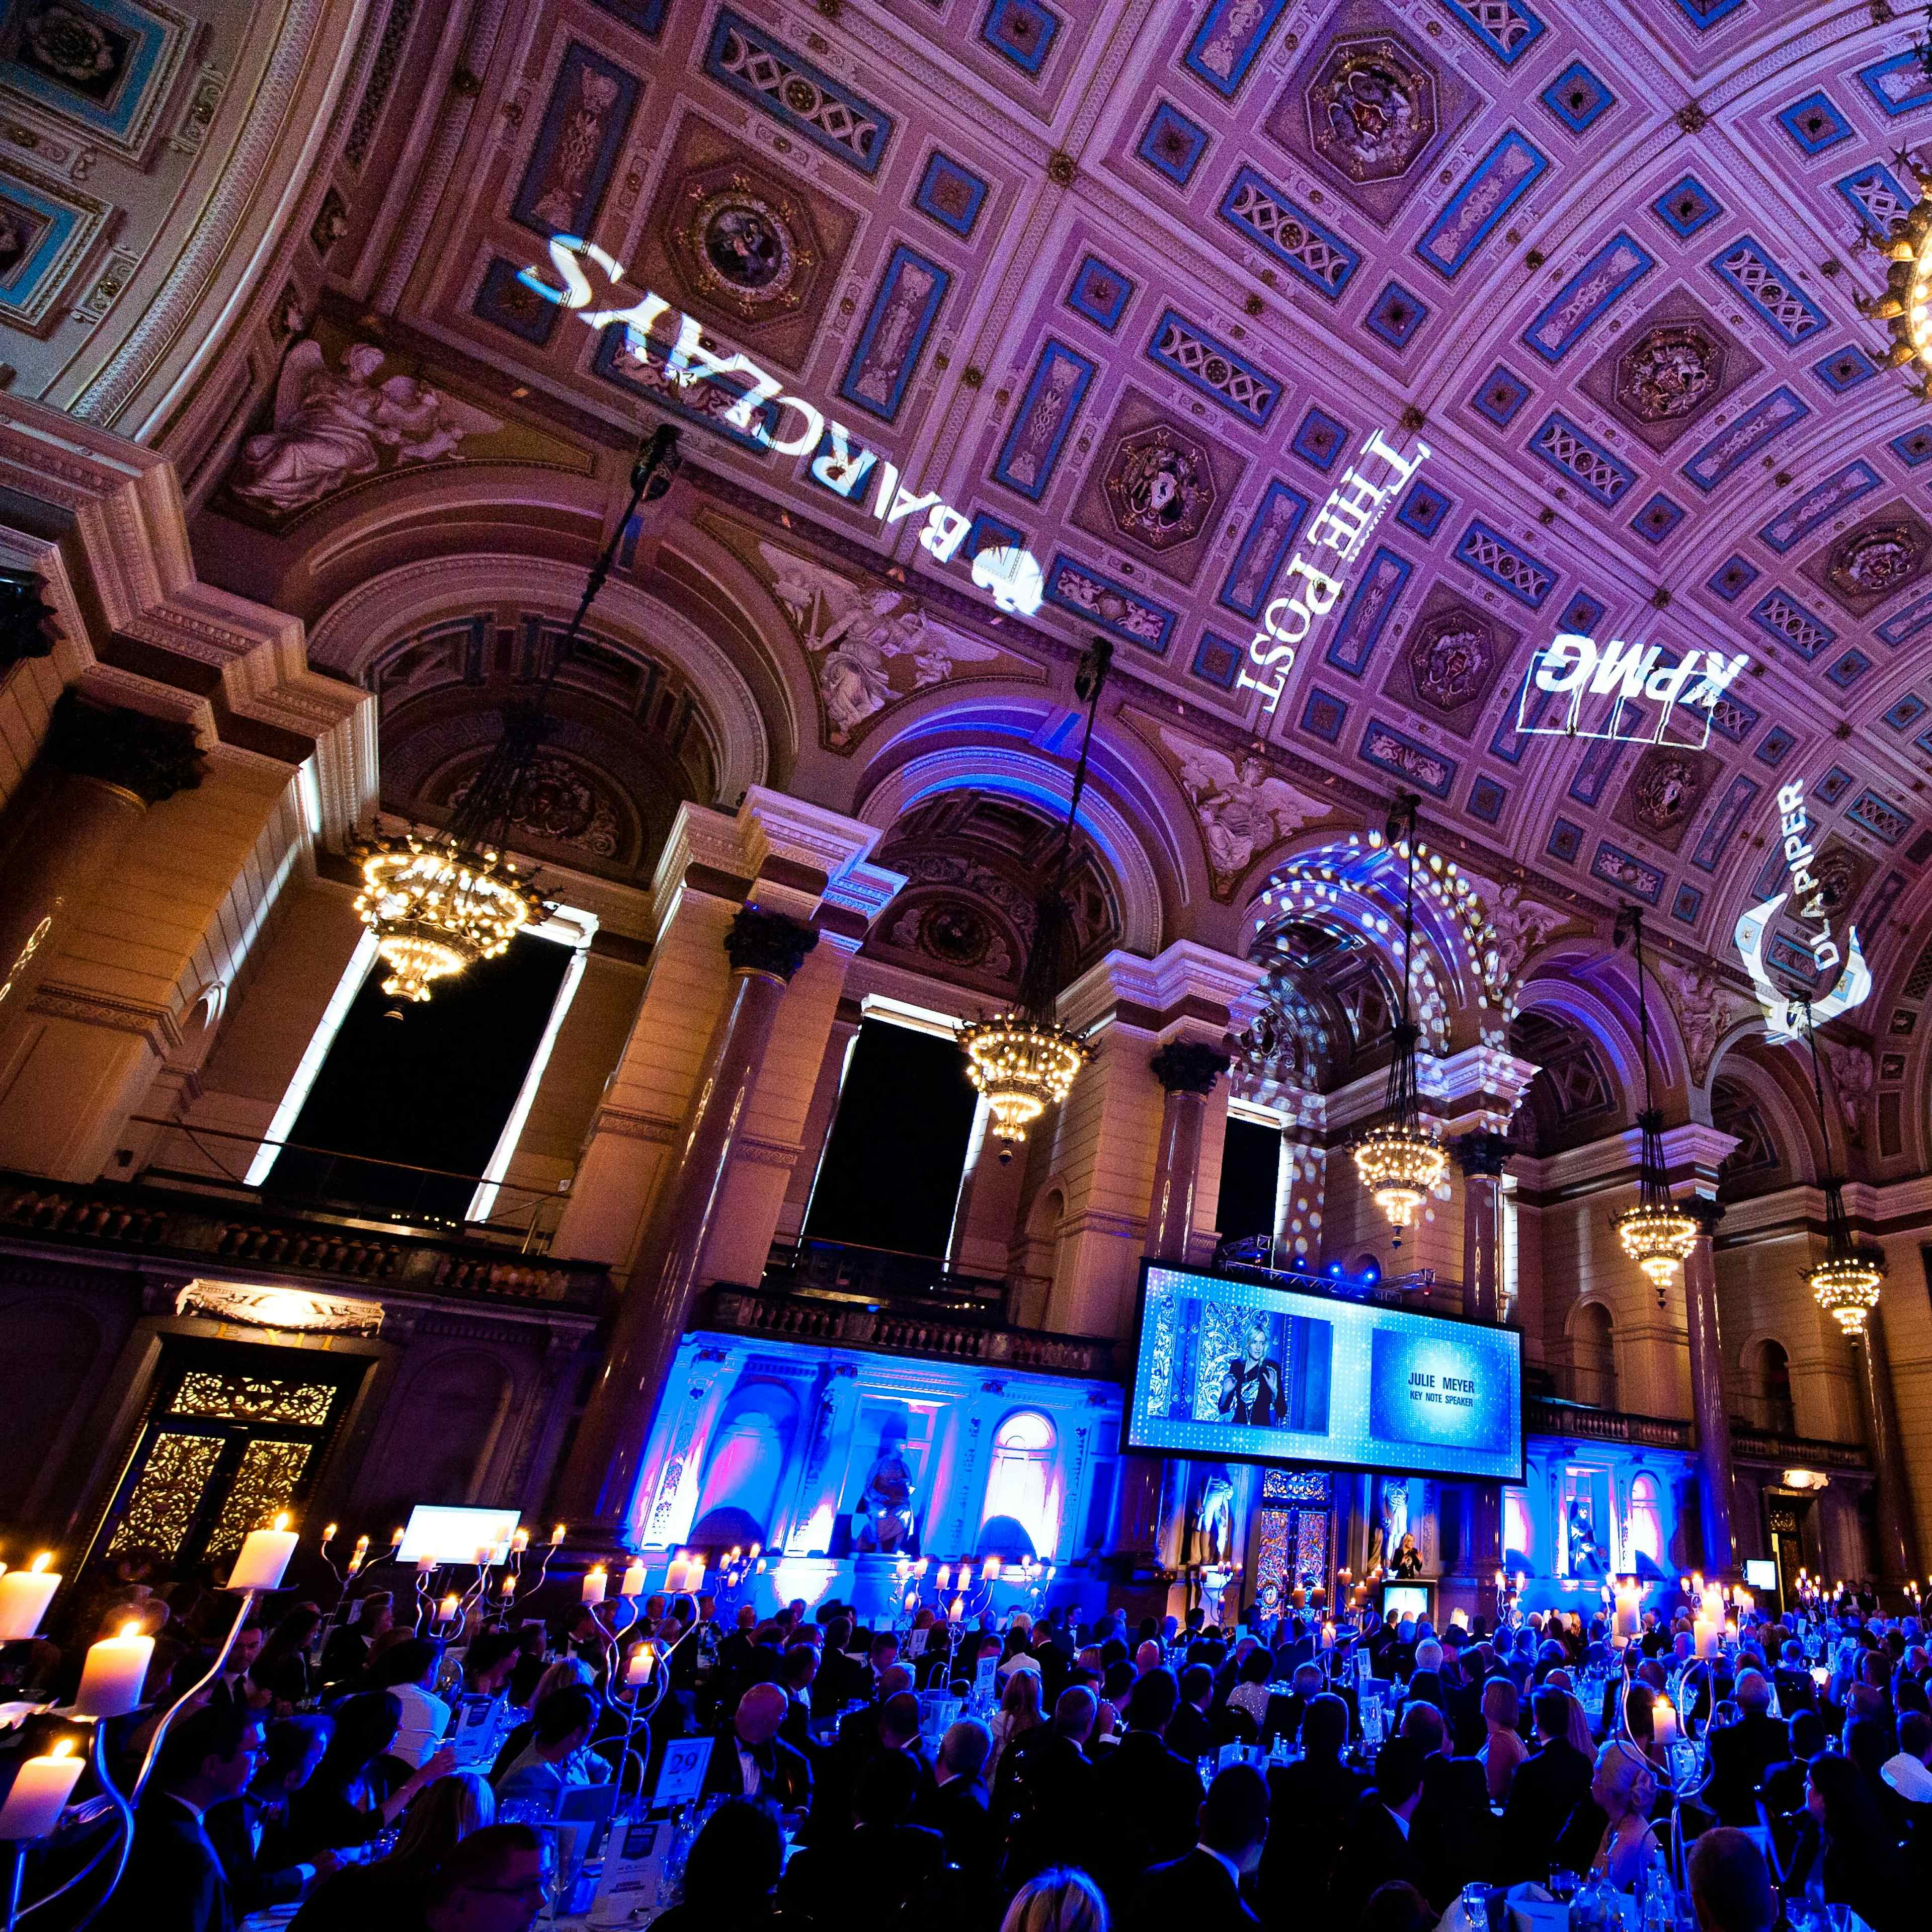 St George's Hall - The Great Hall image 2